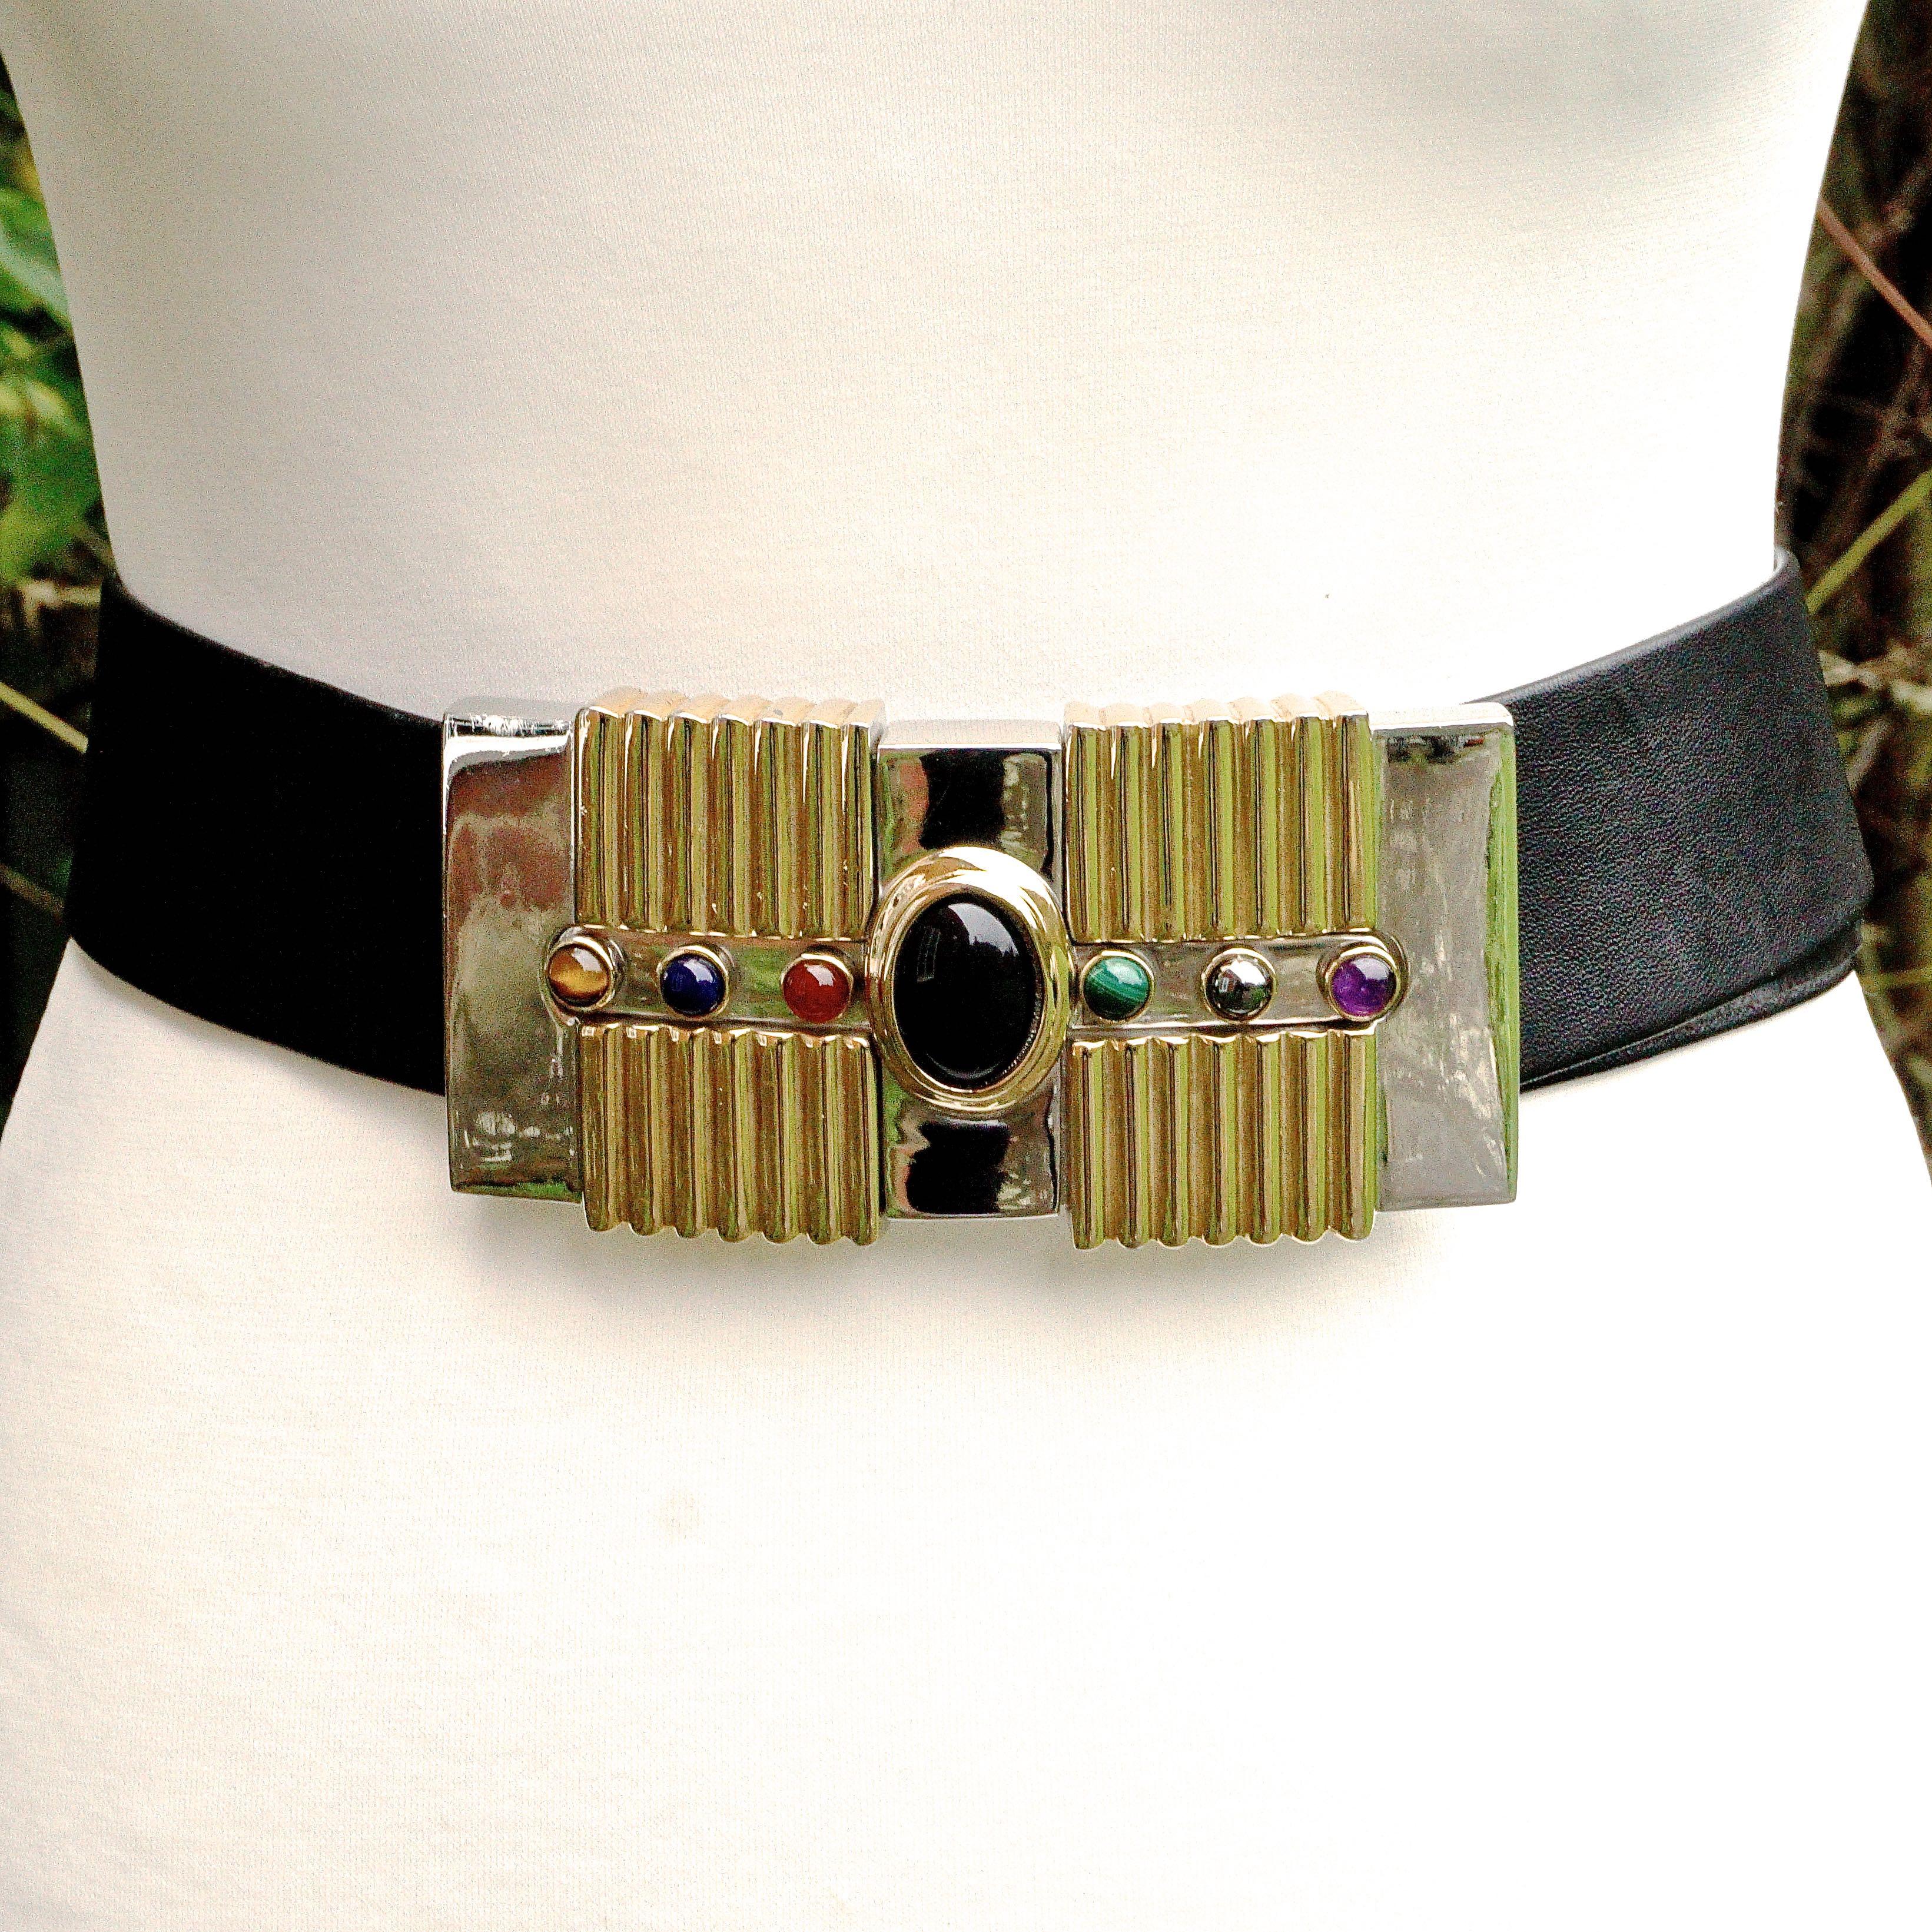 Alexis Kirk Black Leather Belt with Semi Precious Stones Buckle circa 1980s For Sale 2